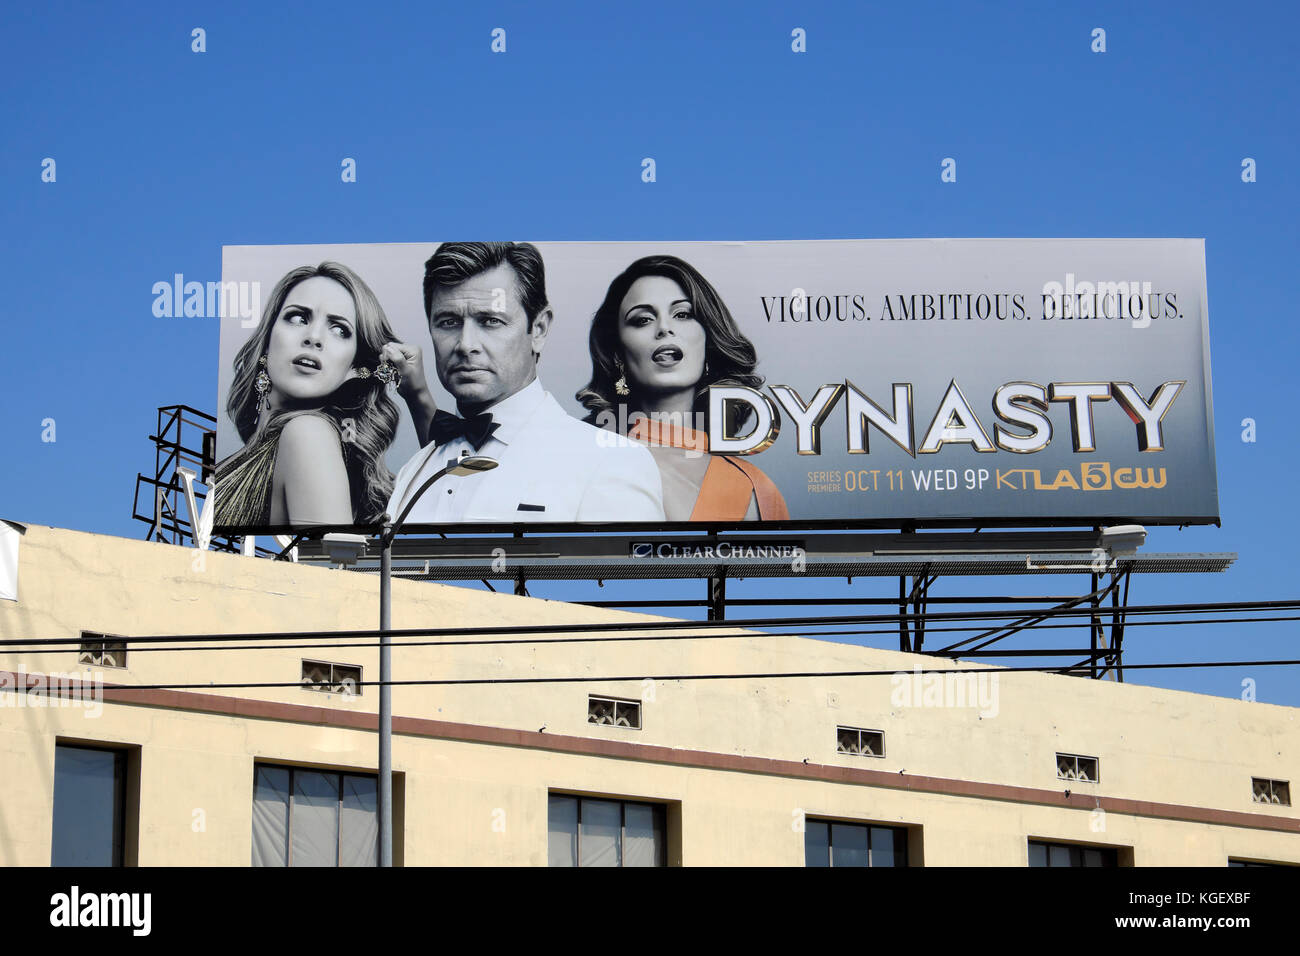 KTLA television virtual channel 5 advertising billboard poster for drama show DYNASTY TV series on Hollywood & Sunset Blvd Los Angeles KATHY DEWITT Stock Photo